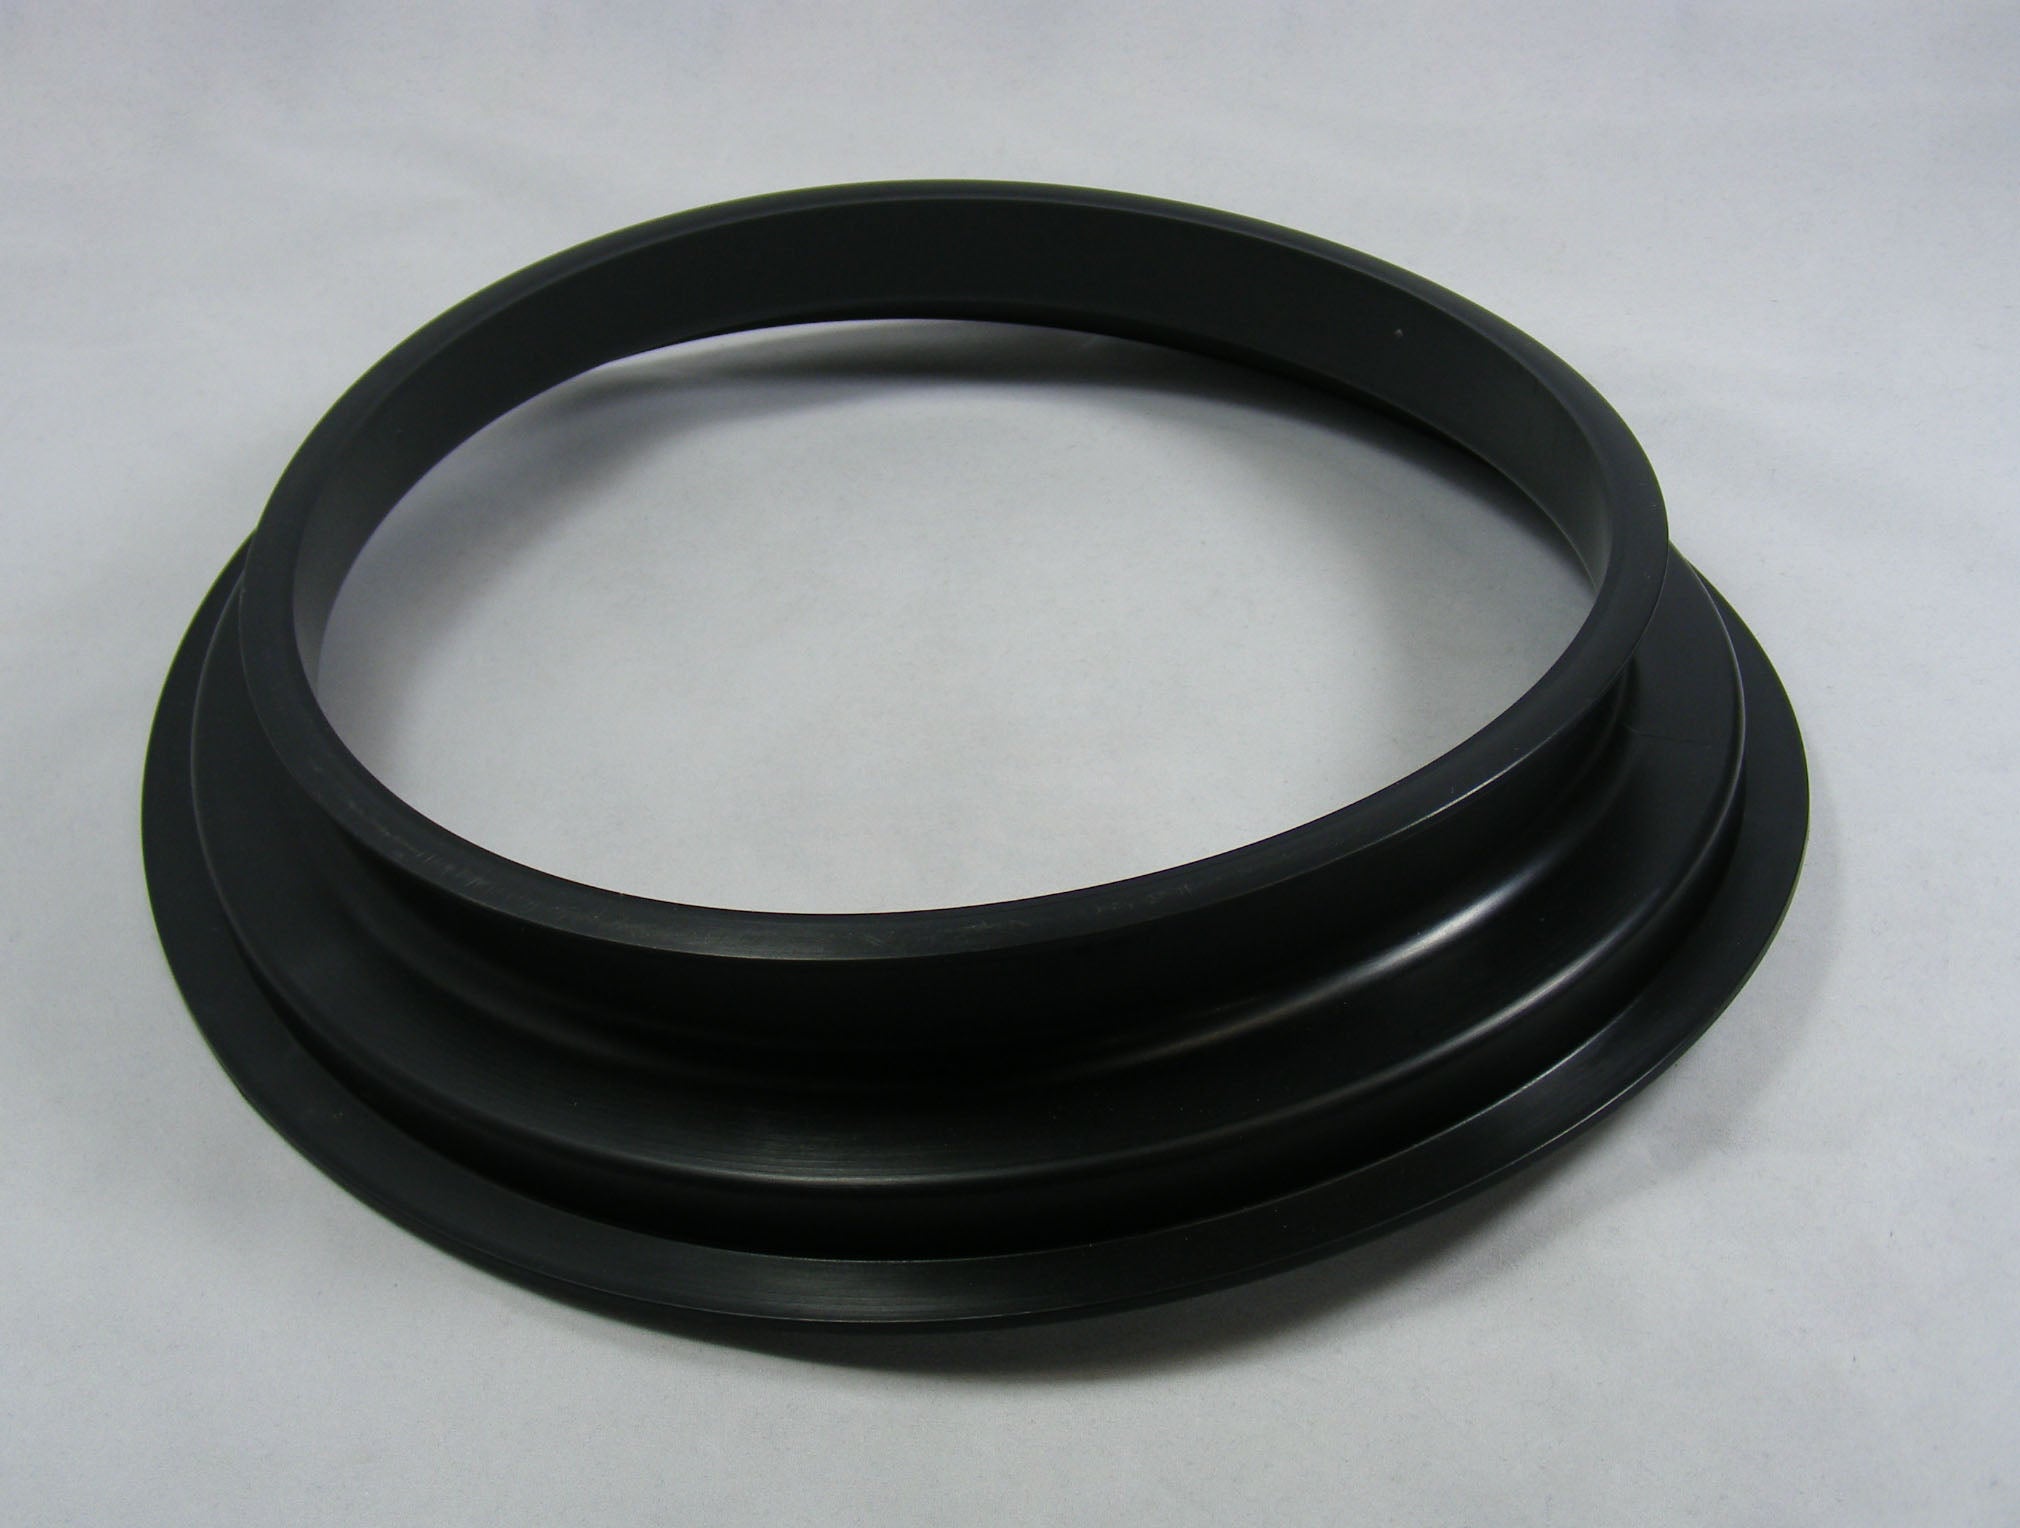 Soteco 00123 filter ring only - d15